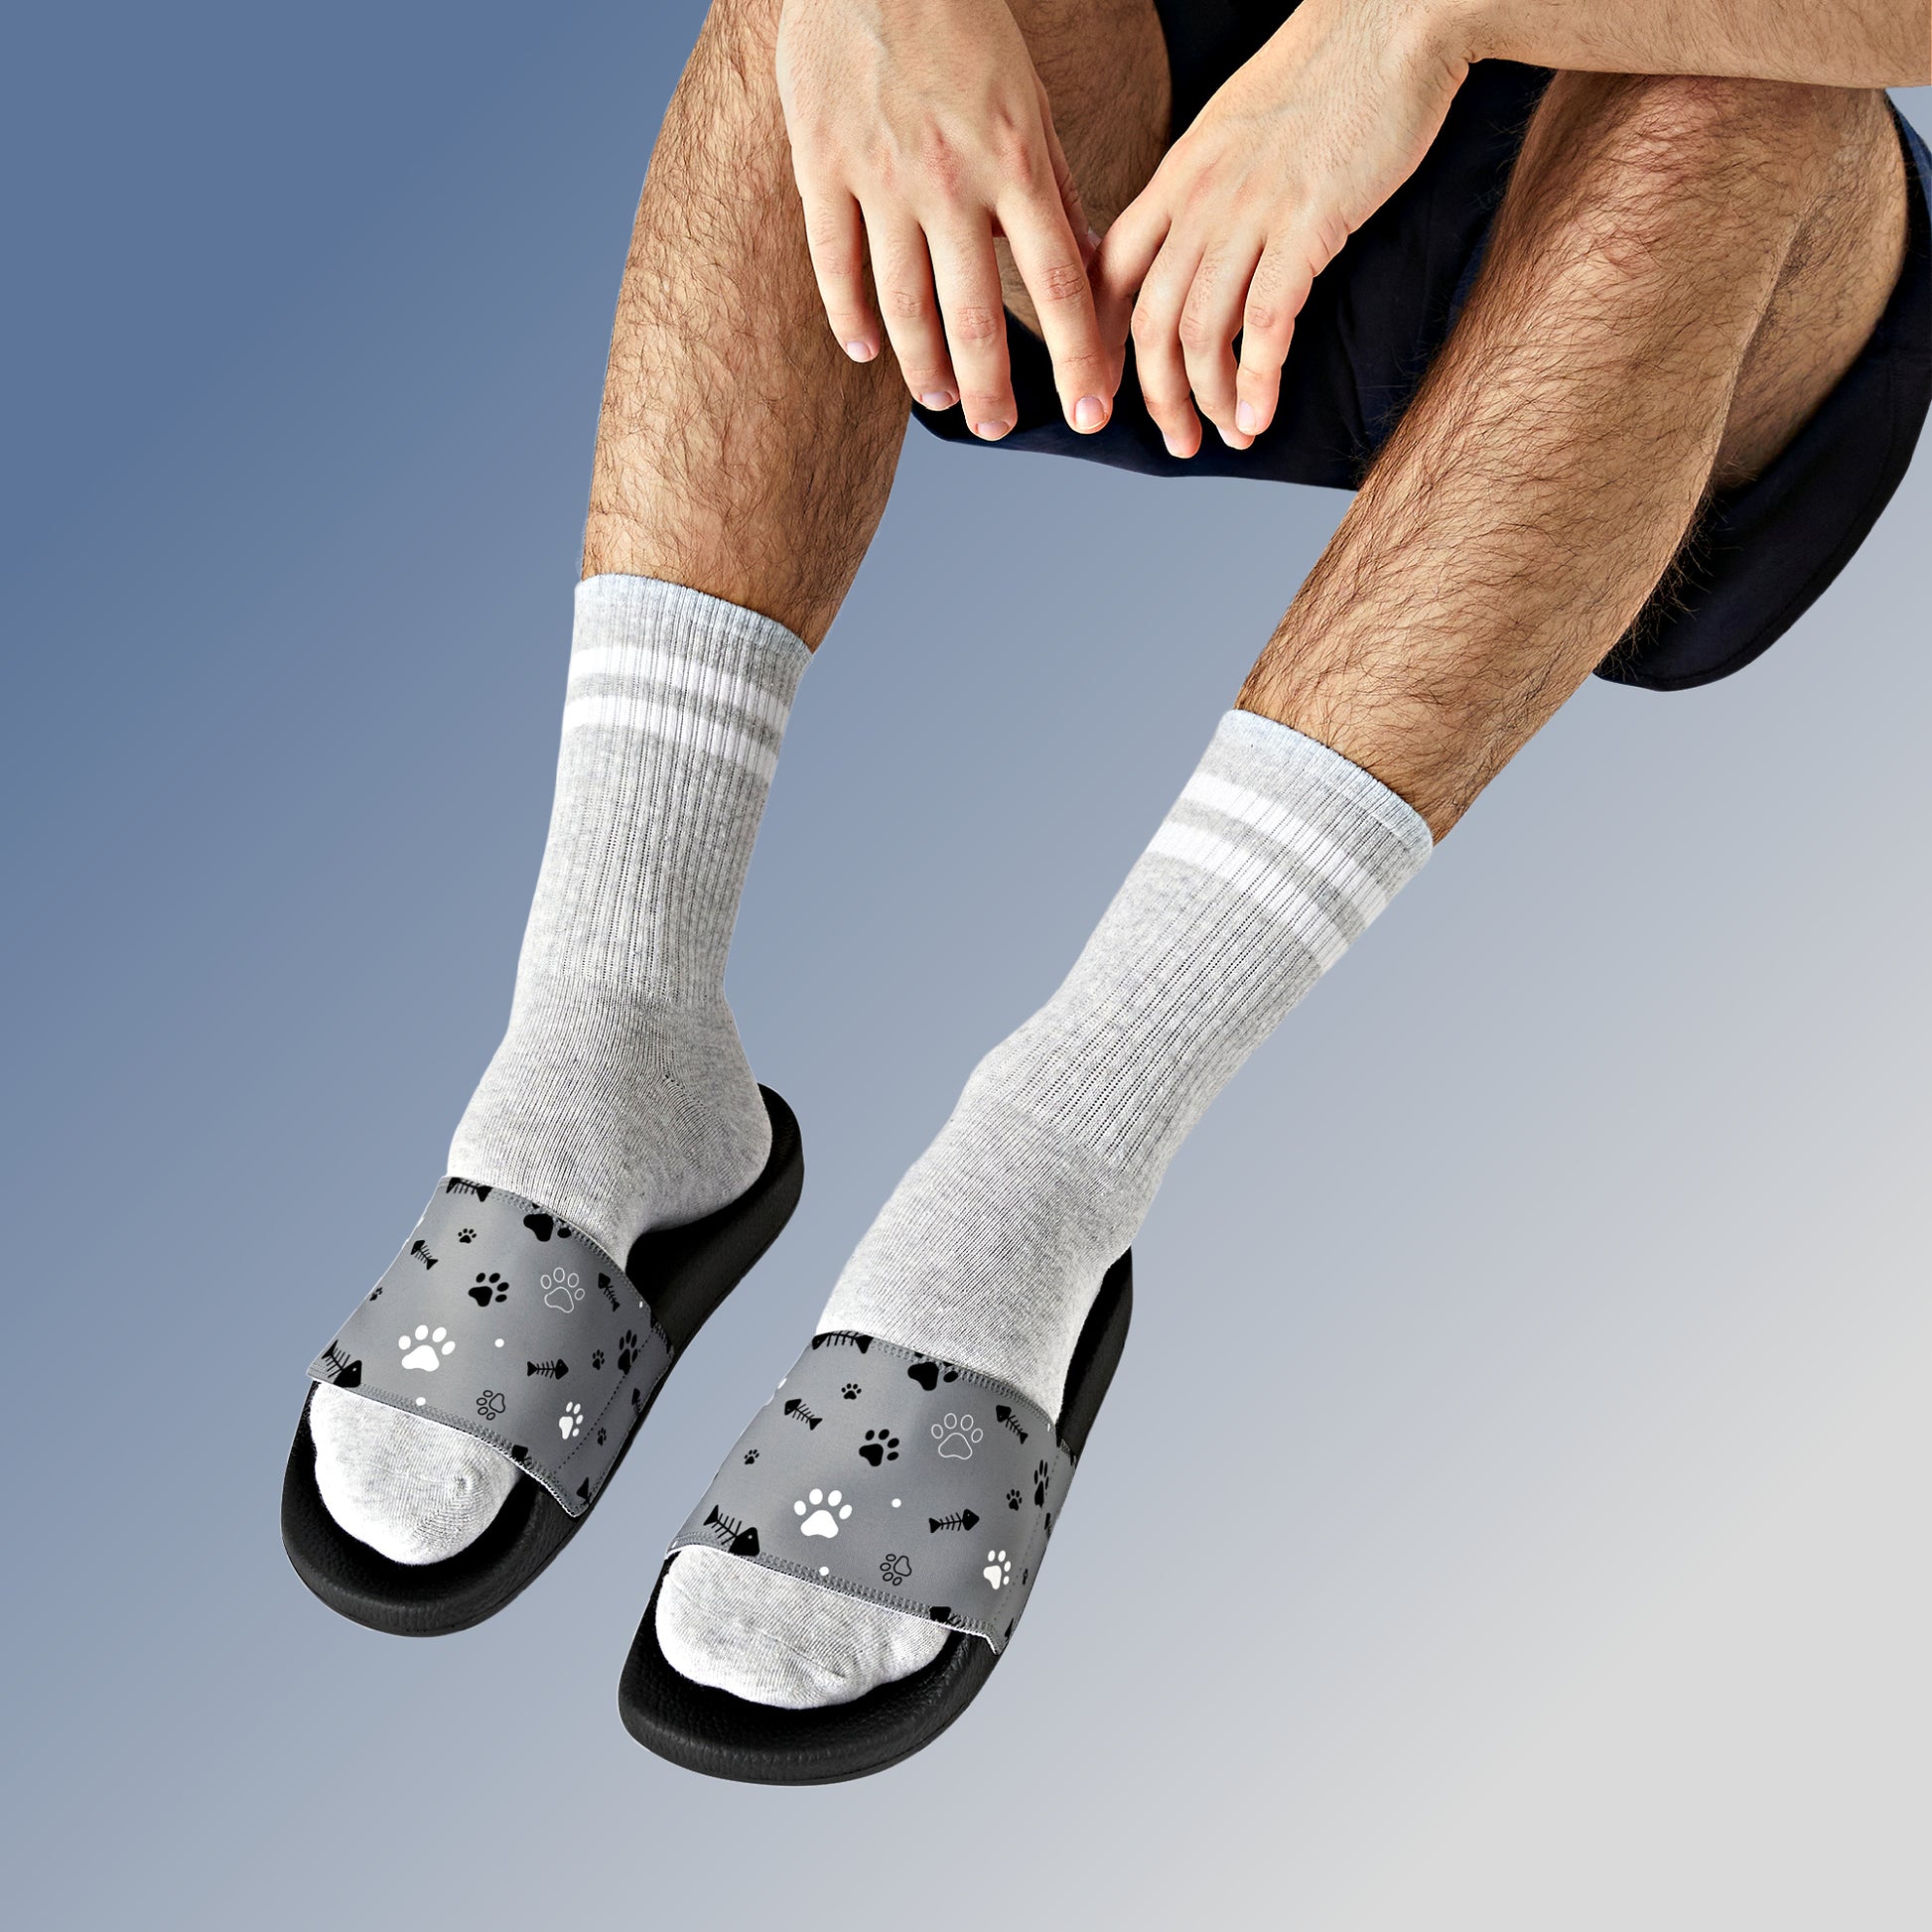 Mock up of the sandals being worn by a man 